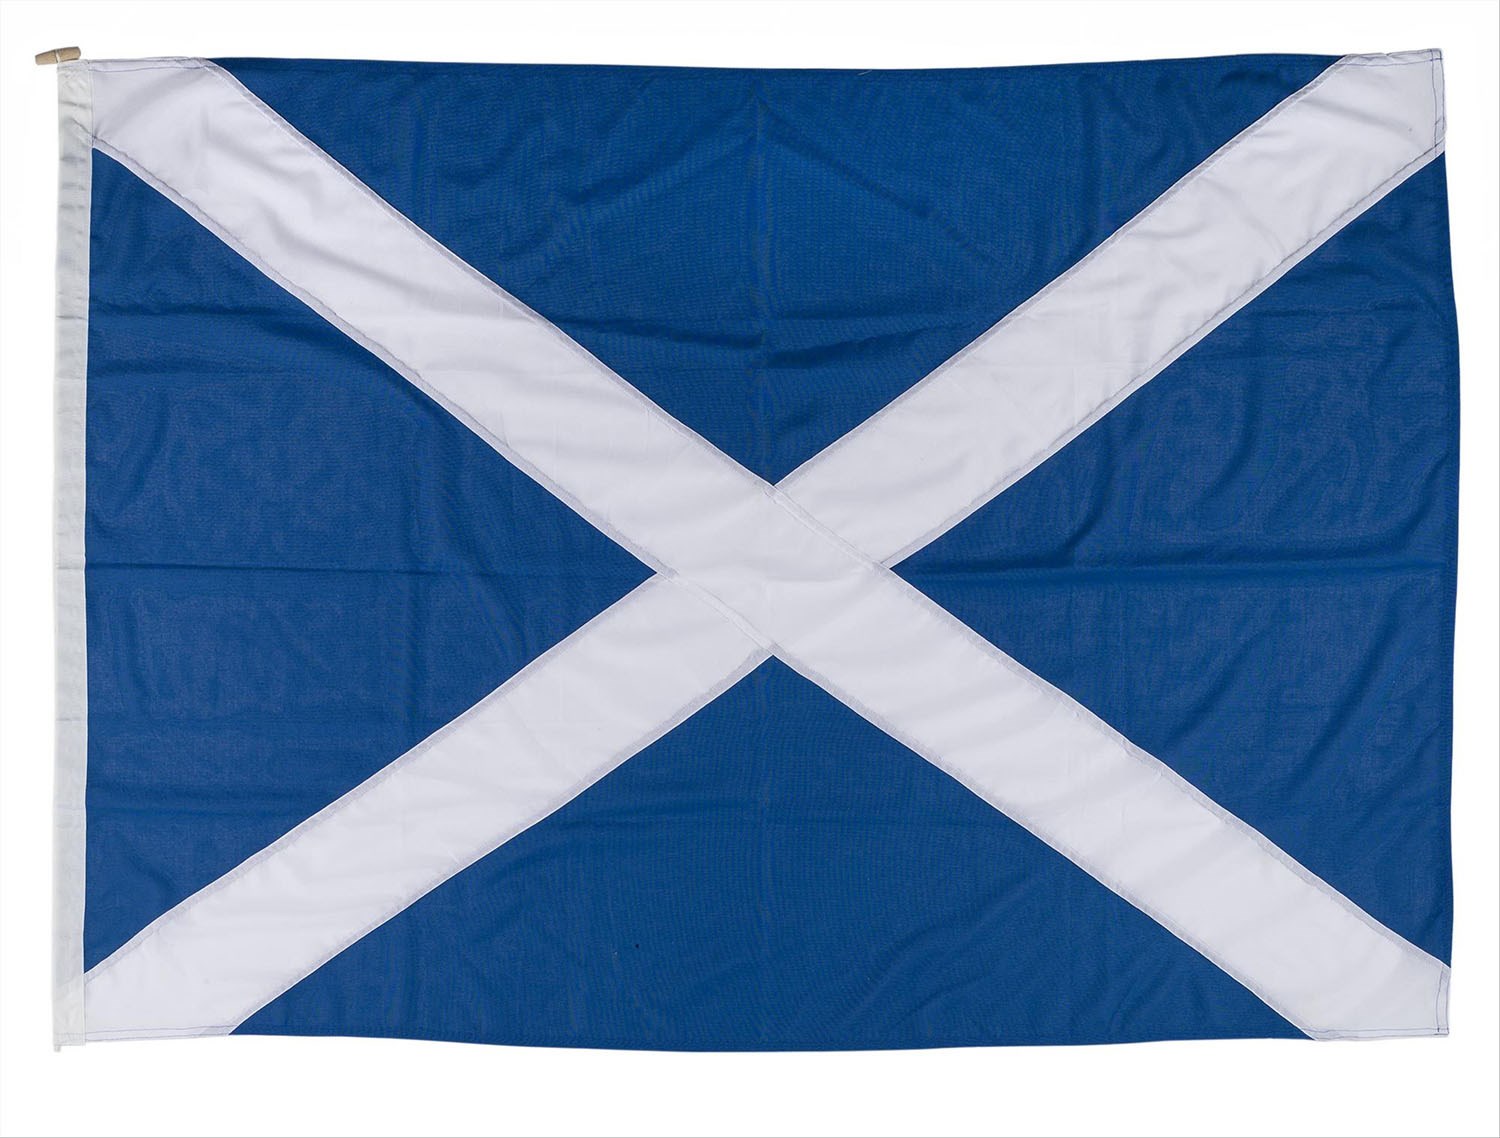 Scottish Saltire flag taken to the International Space Station from 9 to 22 December 2006. On display in the Earth in Space gallery at the National Museum of Scotland.